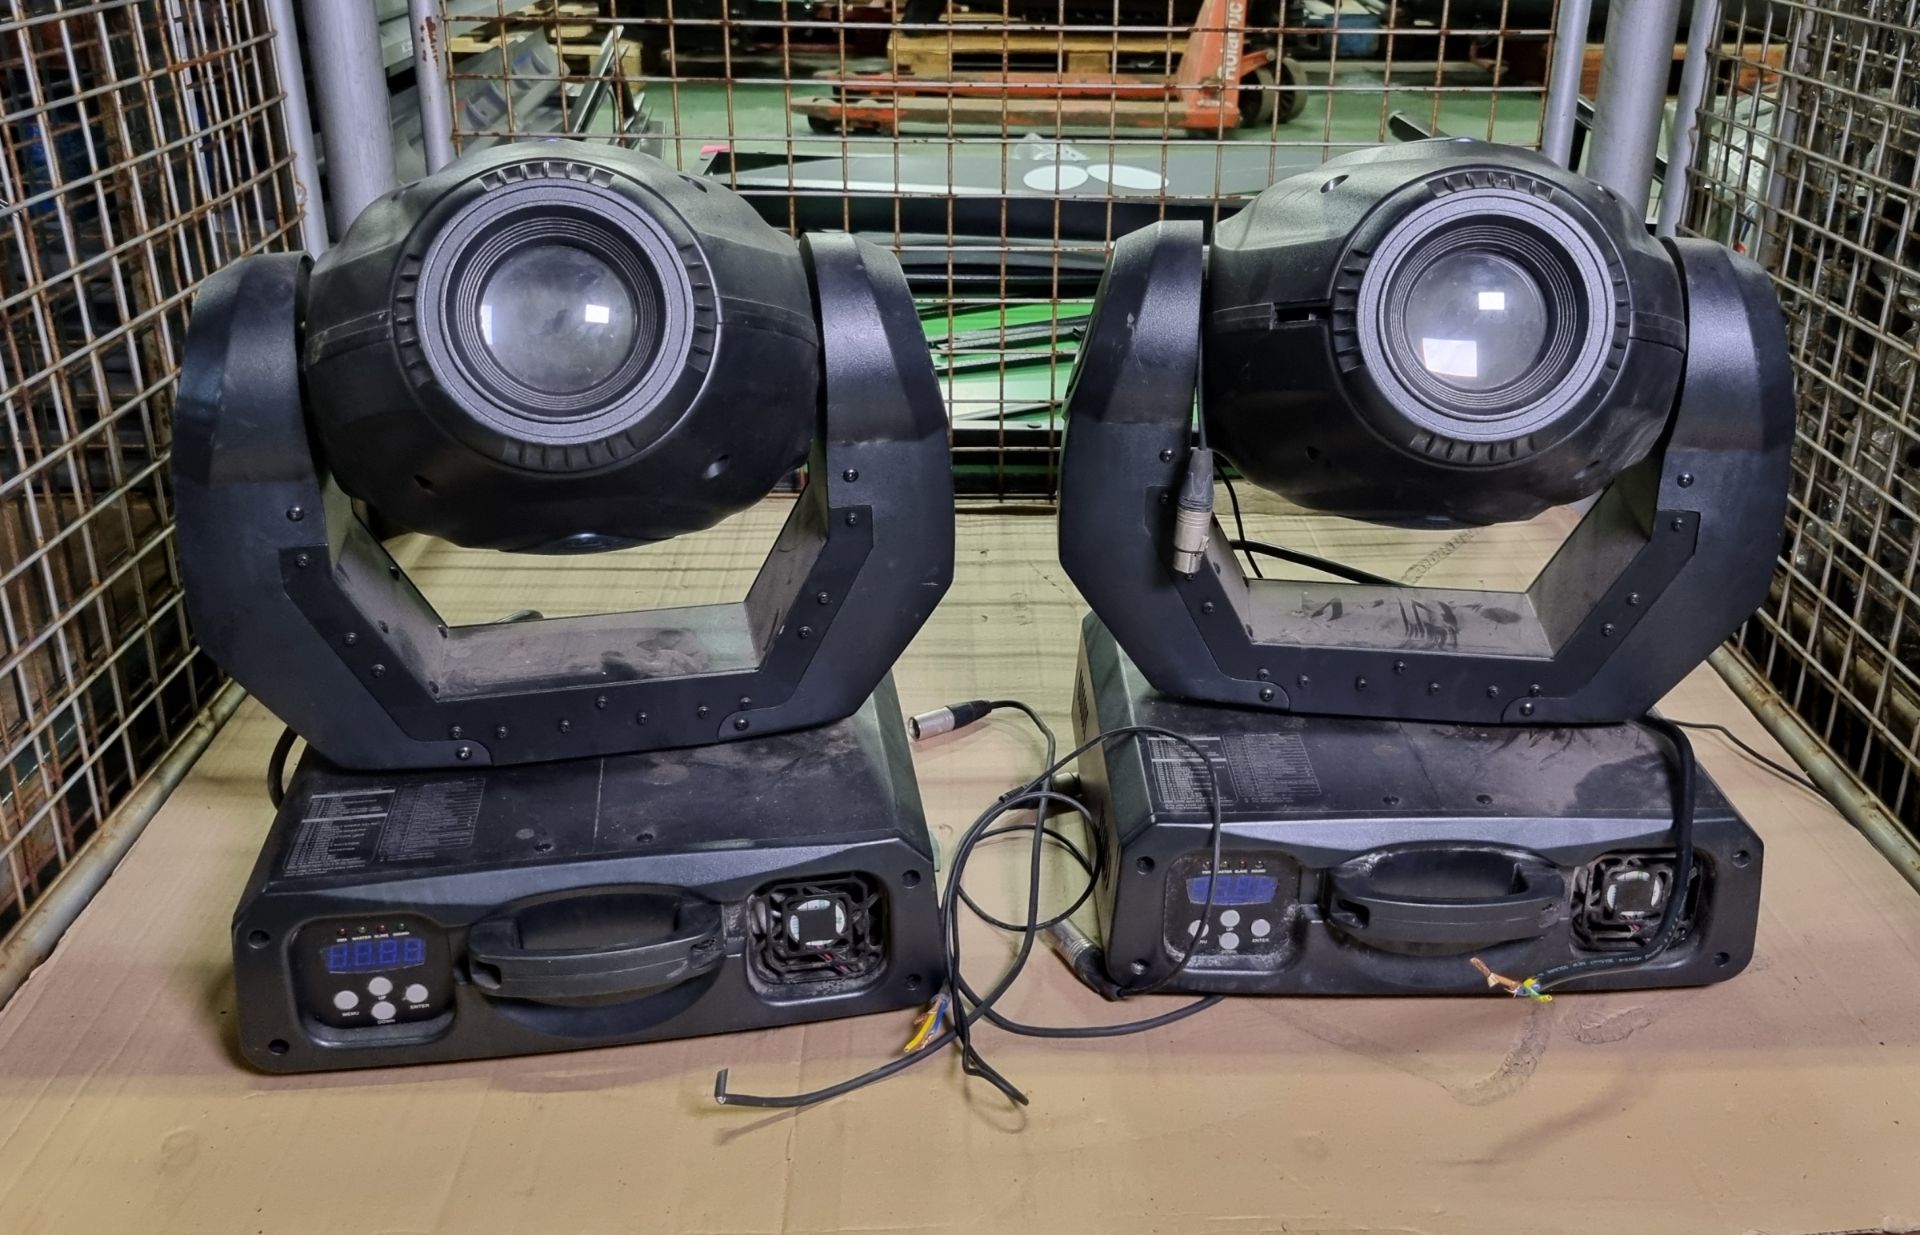 2x iMove 250S moving head scanner lights - Image 2 of 7